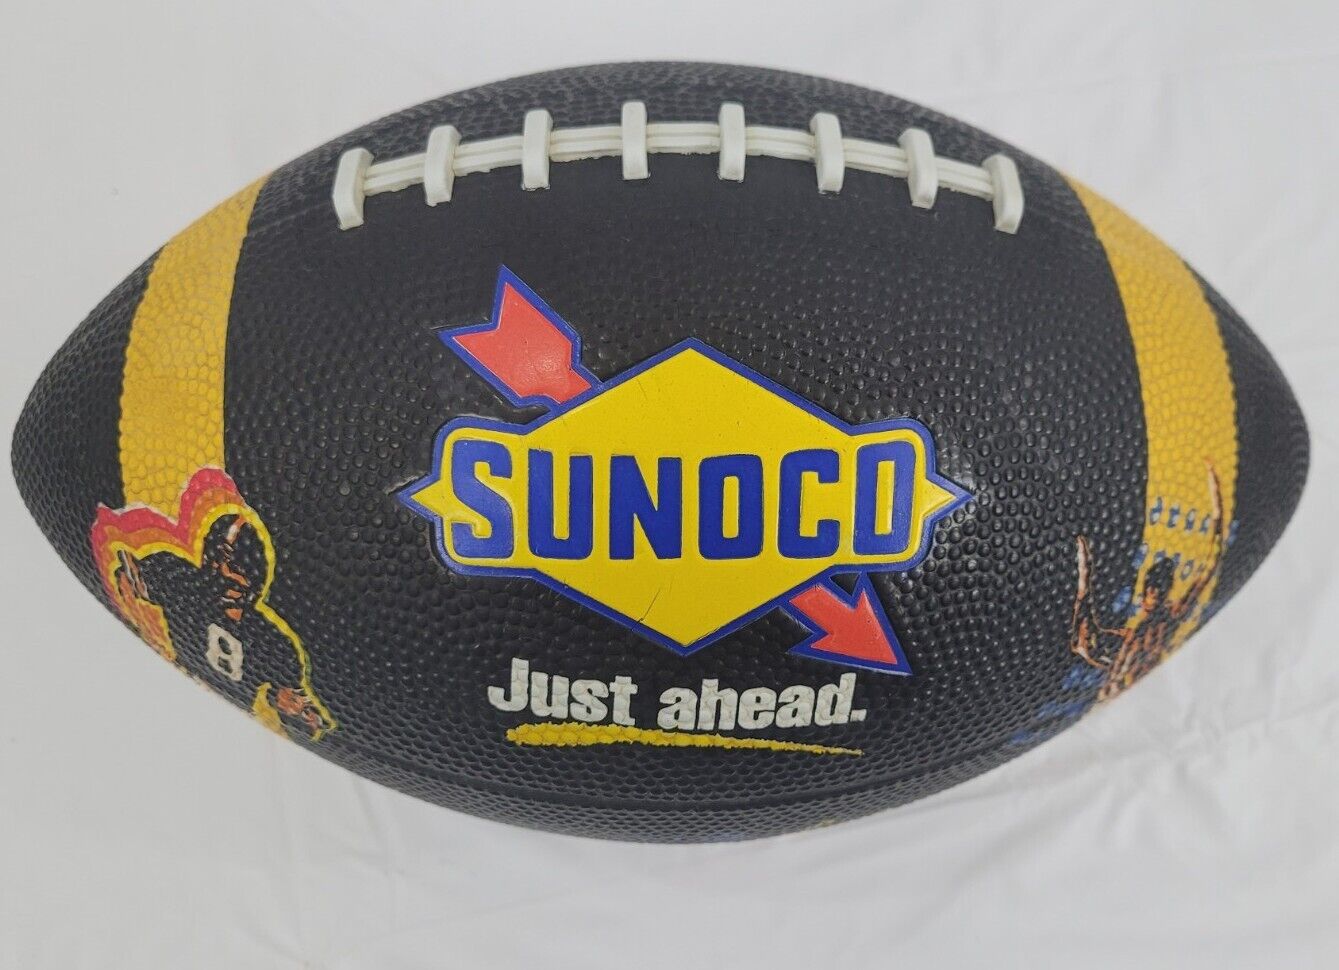 Vintage Sunoco Promotional Official Size Football